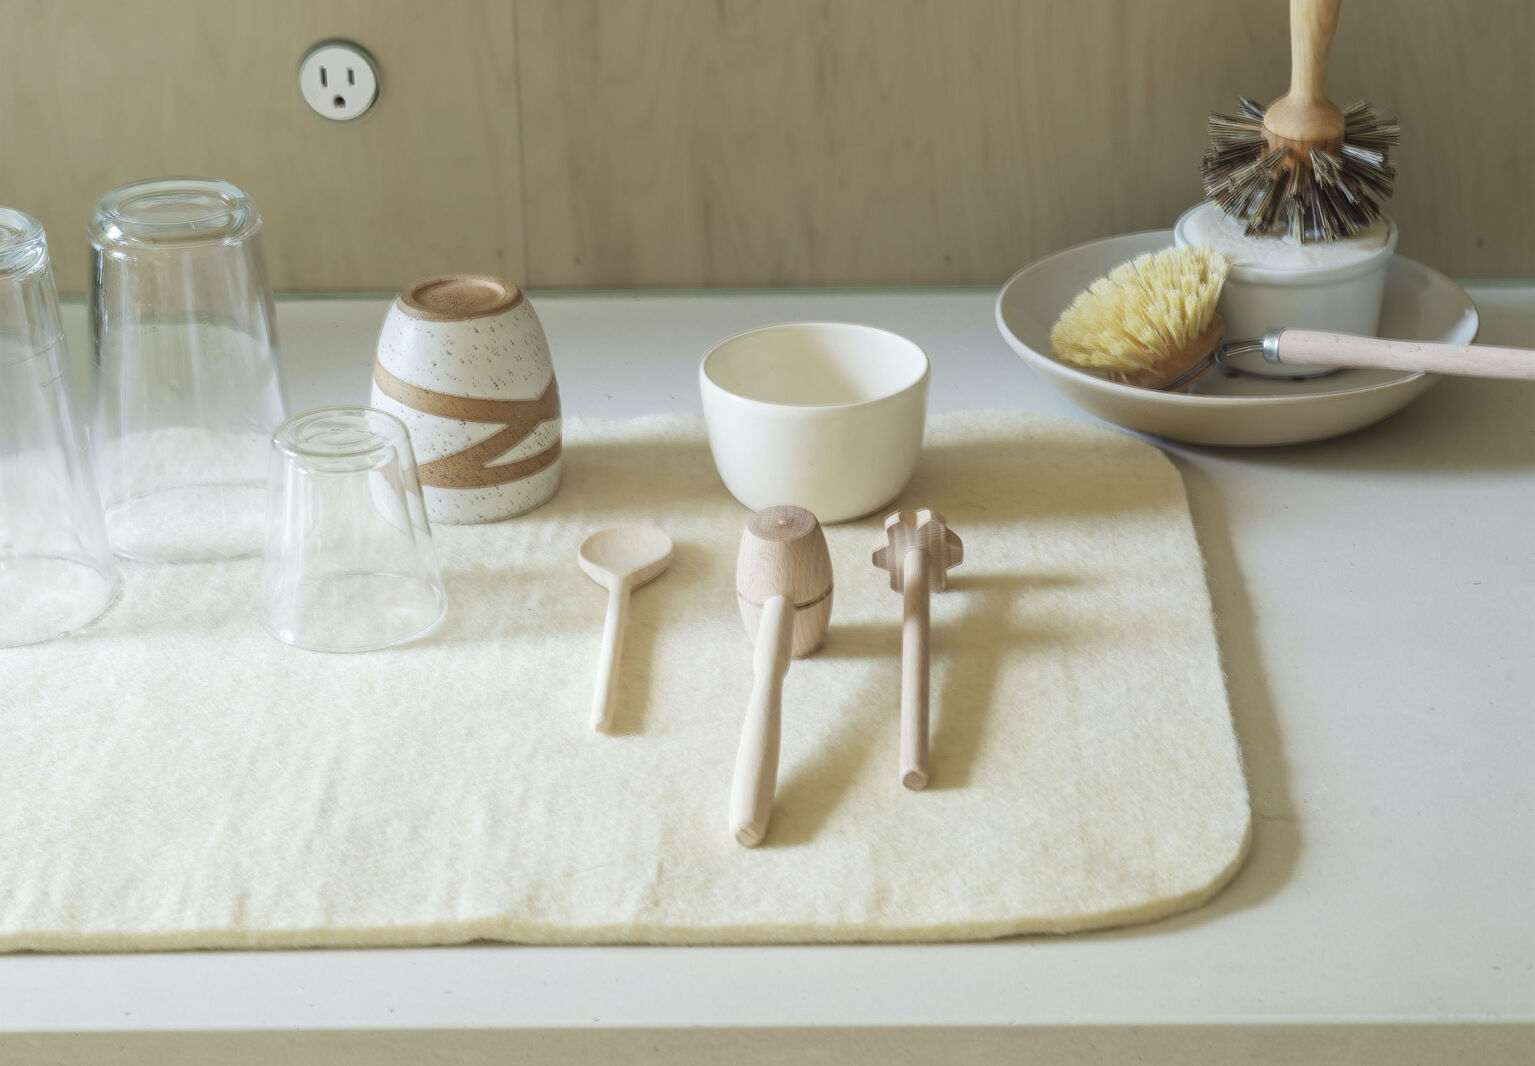 Remodelista Gift Guide 2022 13 Gifts for the LowImpact Kitchen portrait 3